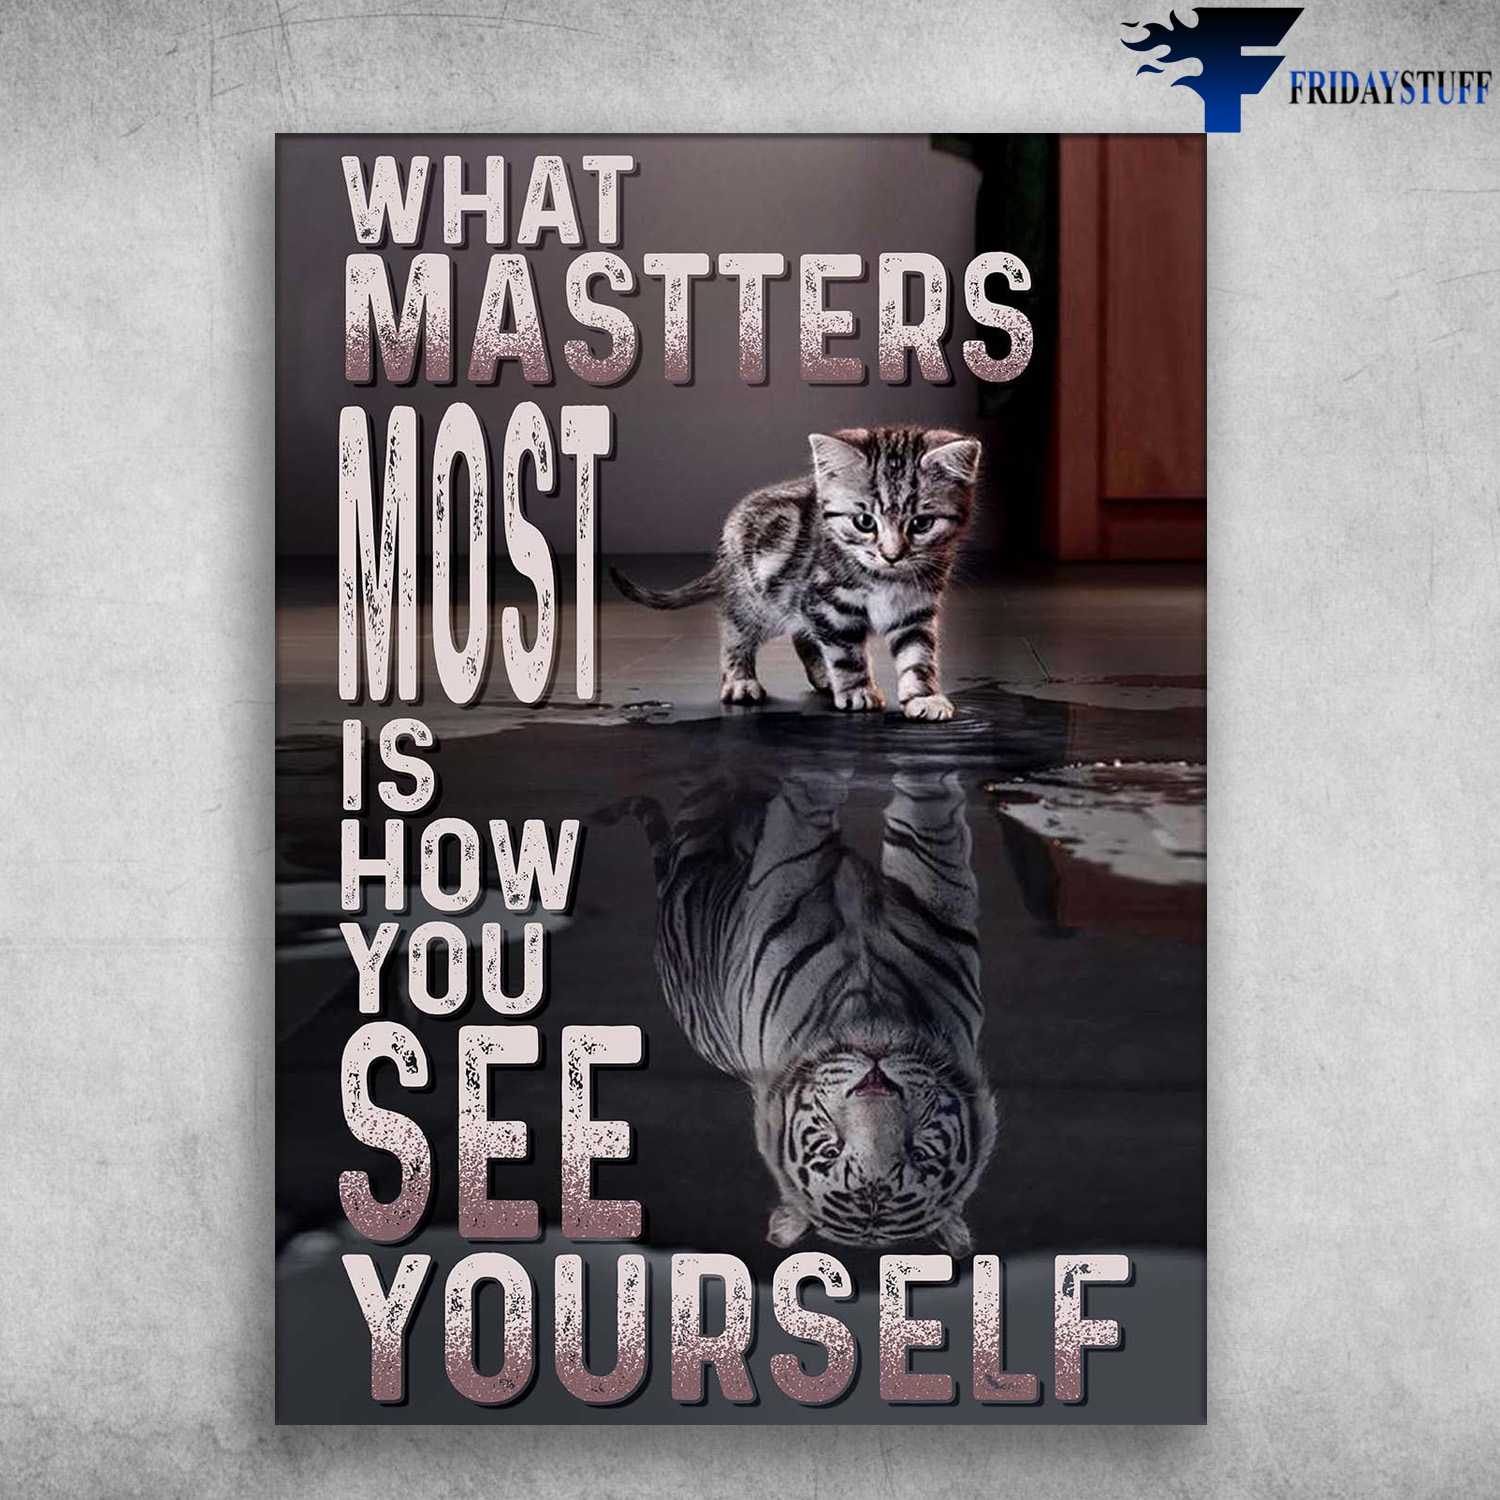 Cat And Tiger, White Tiger - What Mastters Most Is, How You See Yourself